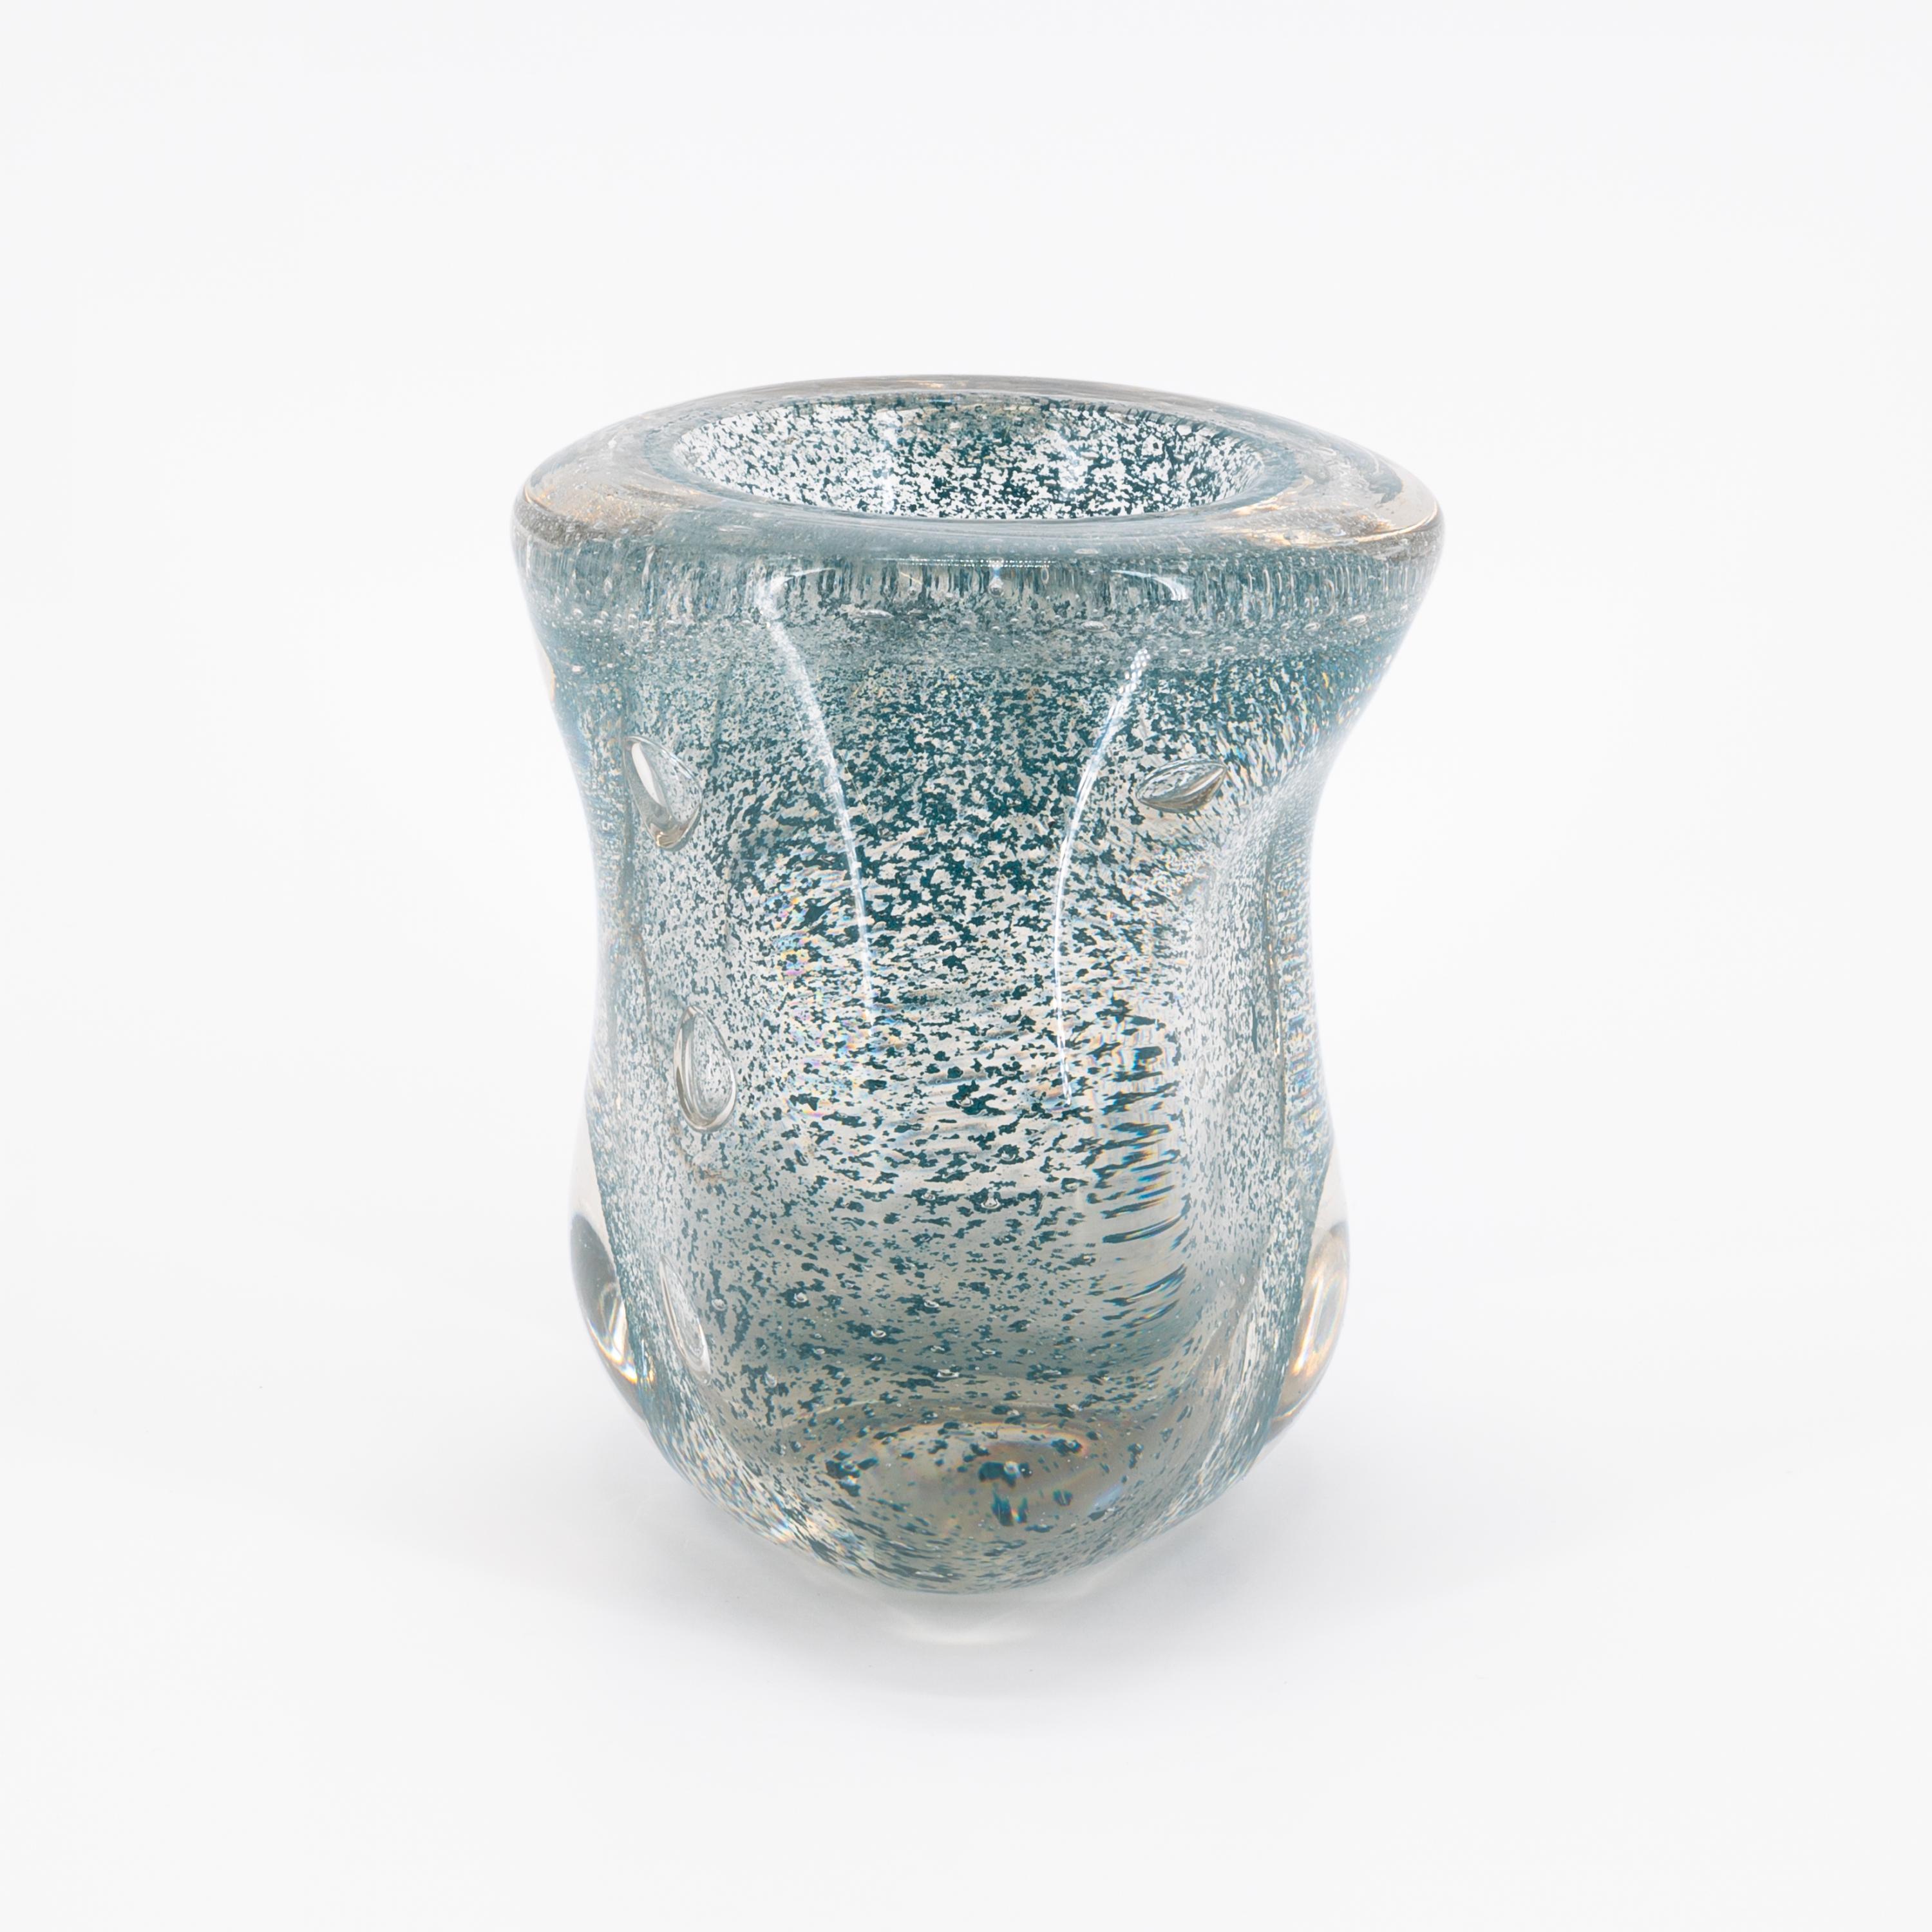 GLASS VASE WITH TURQUOISE BLUE POWDER INCLUSIONS - Image 2 of 6